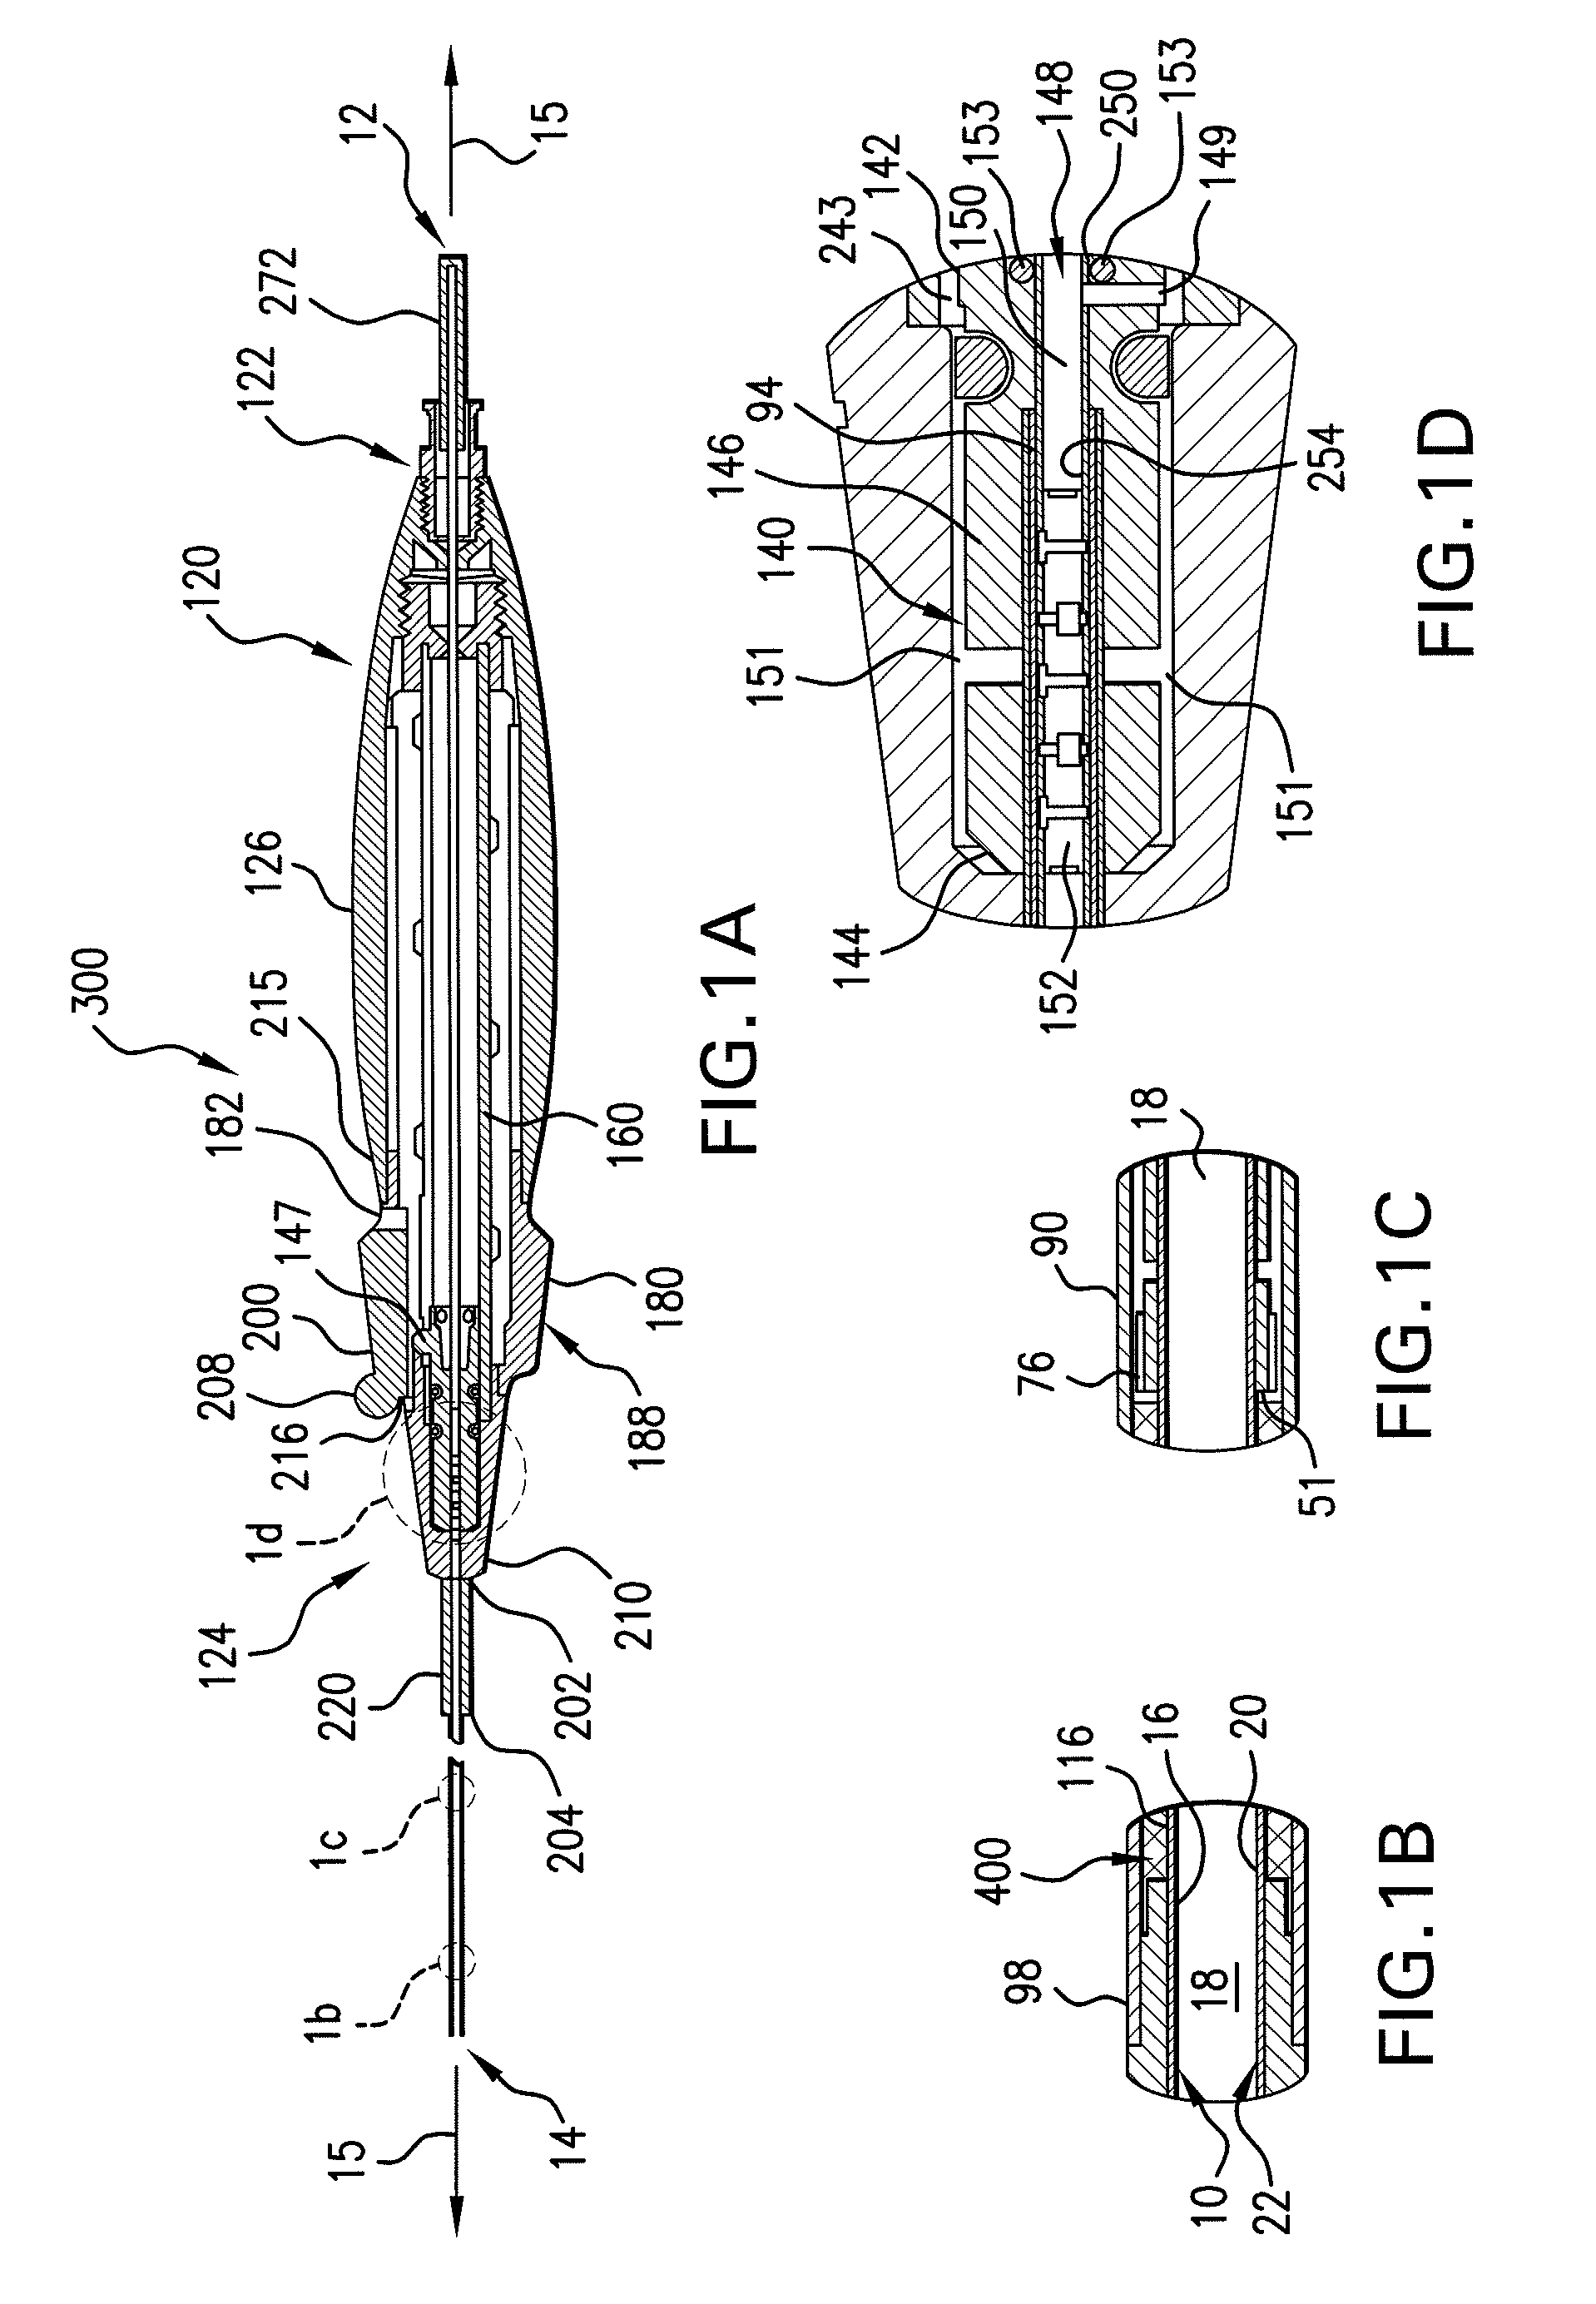 Rapid-exchange retractable sheath self-expanding delivery system with incompressible inner member and flexible distal assembly